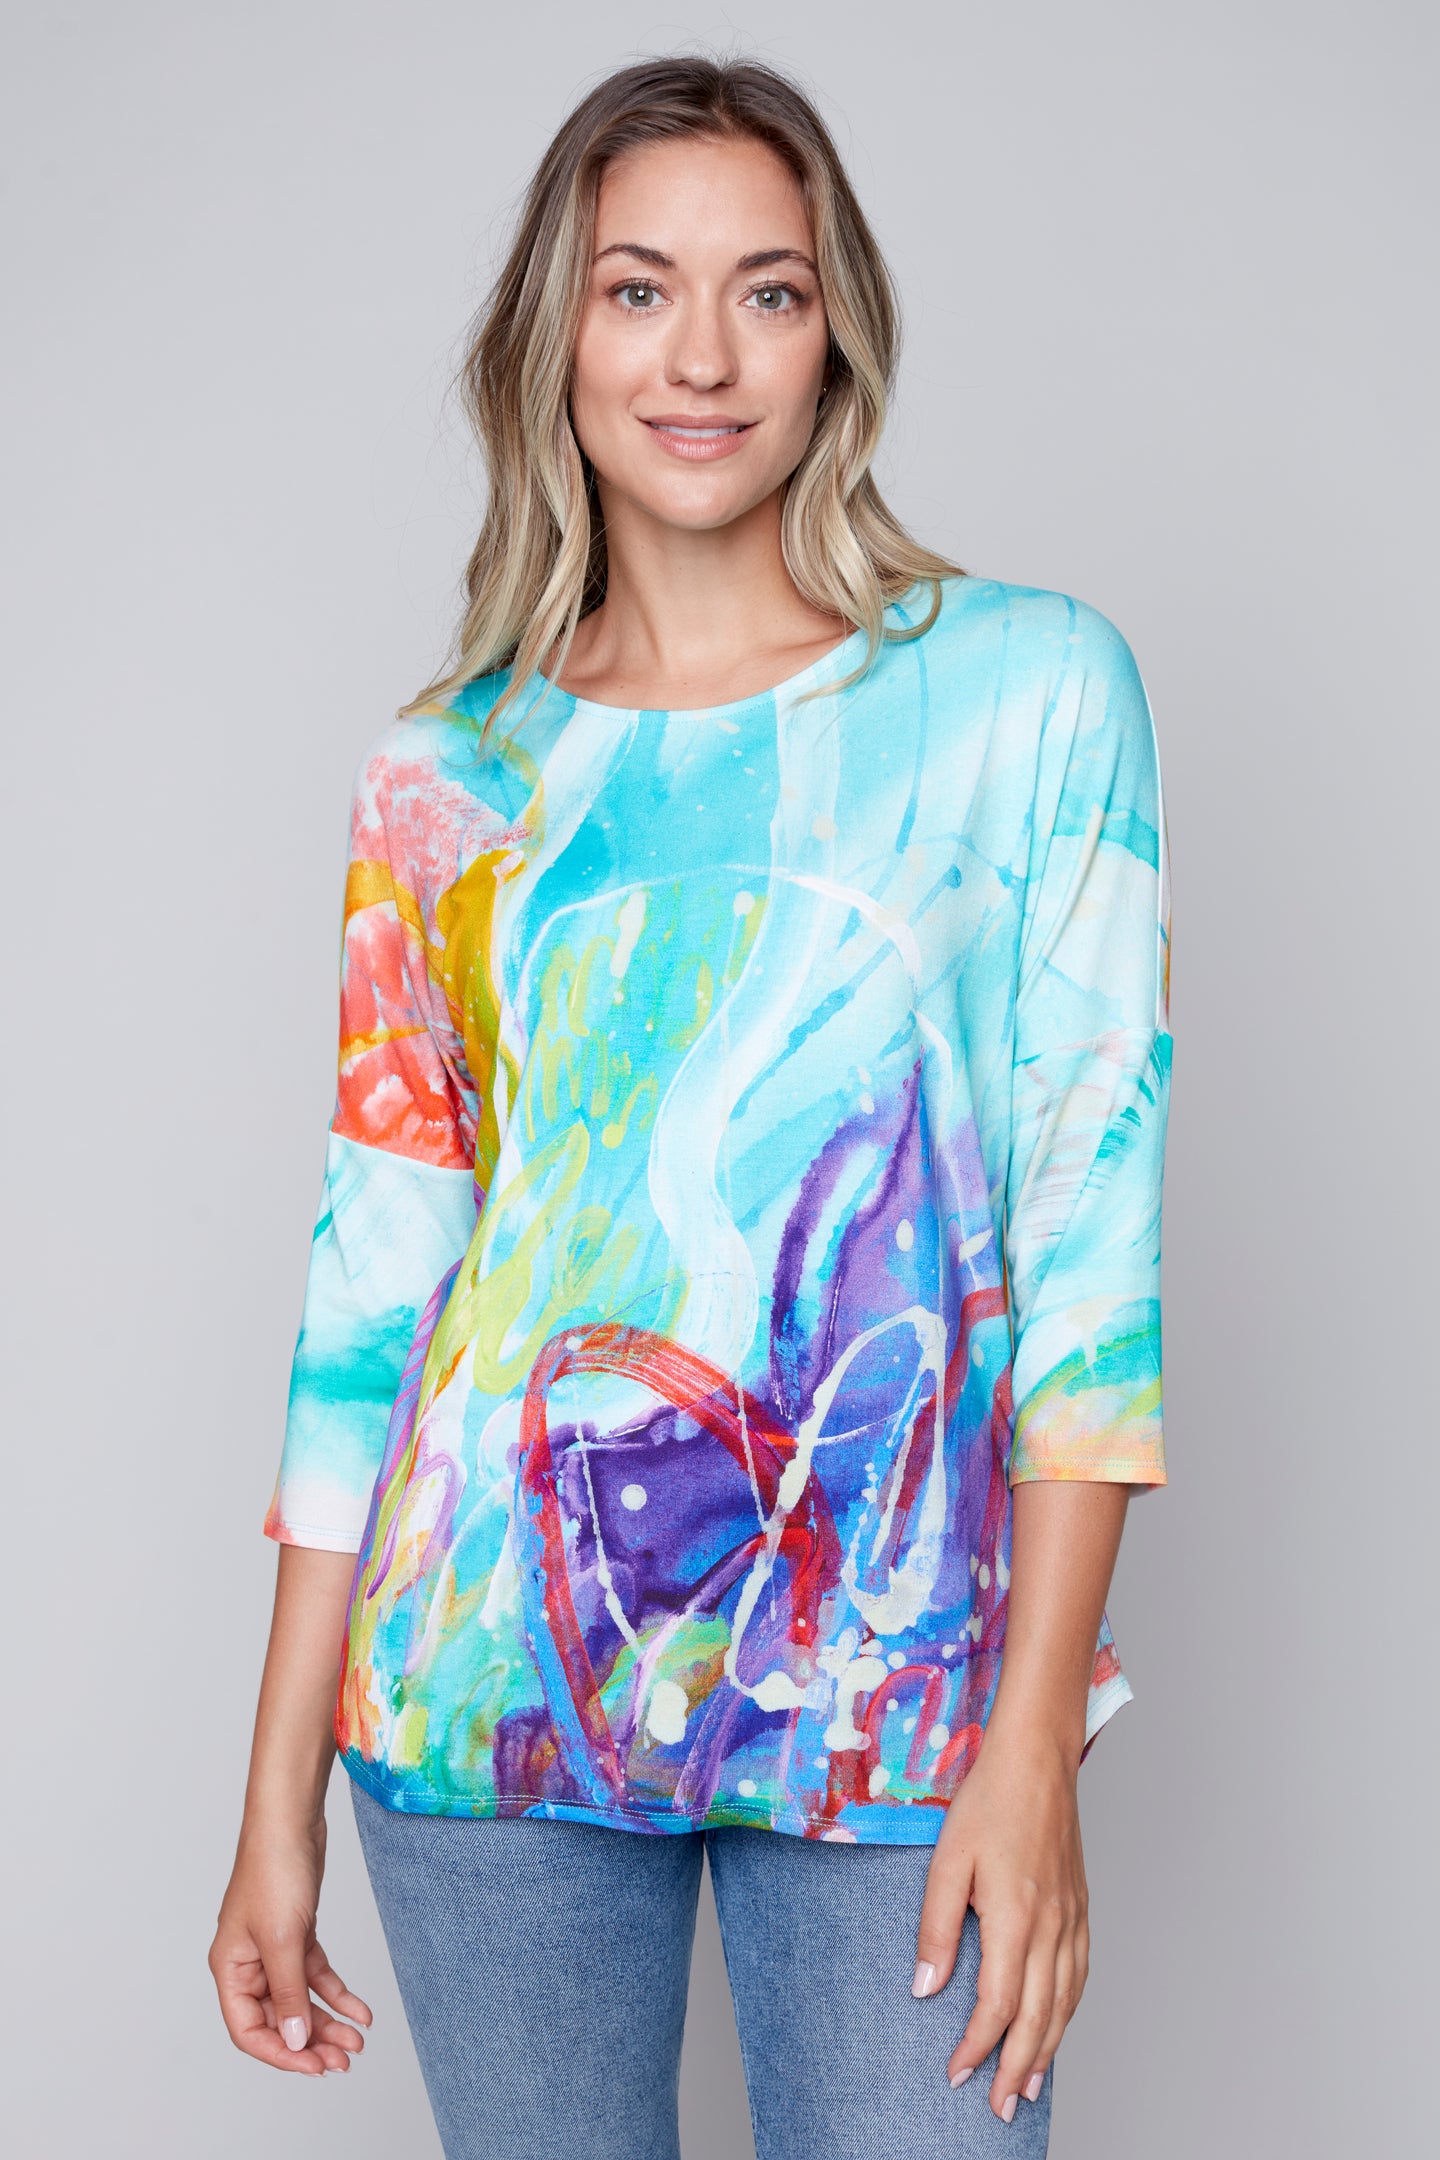 This Side of Home 3/4-length sleeve top